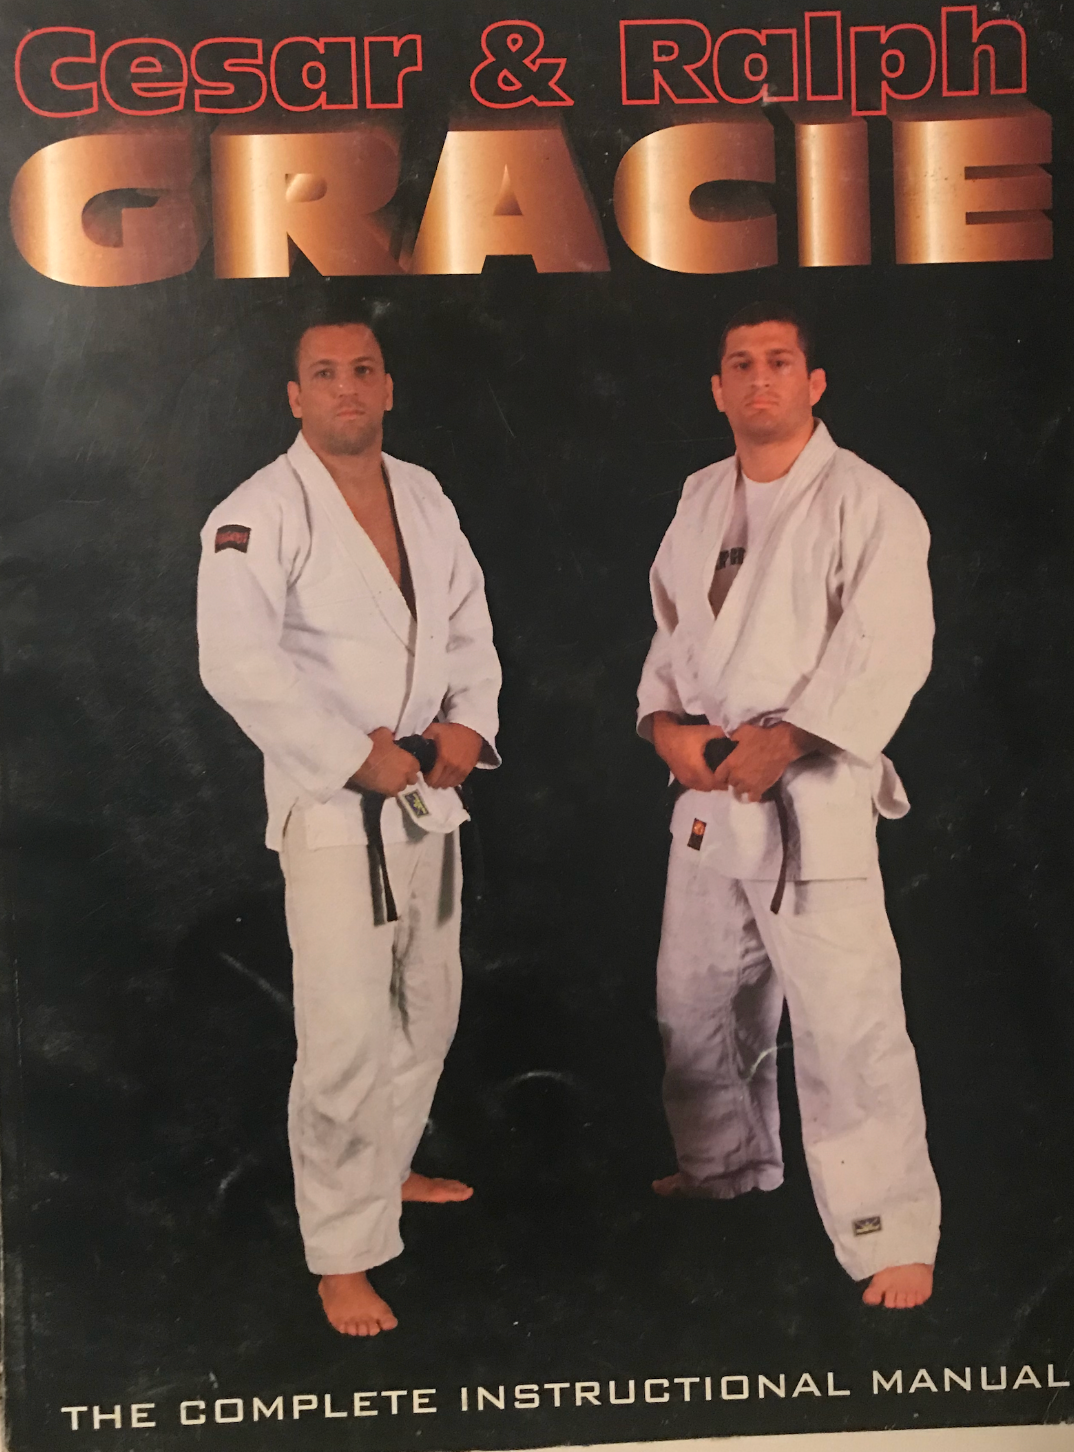 Cesar & Ralph Gracie Complete BJ Instructional Manual (Preowned) - Budovideos Inc